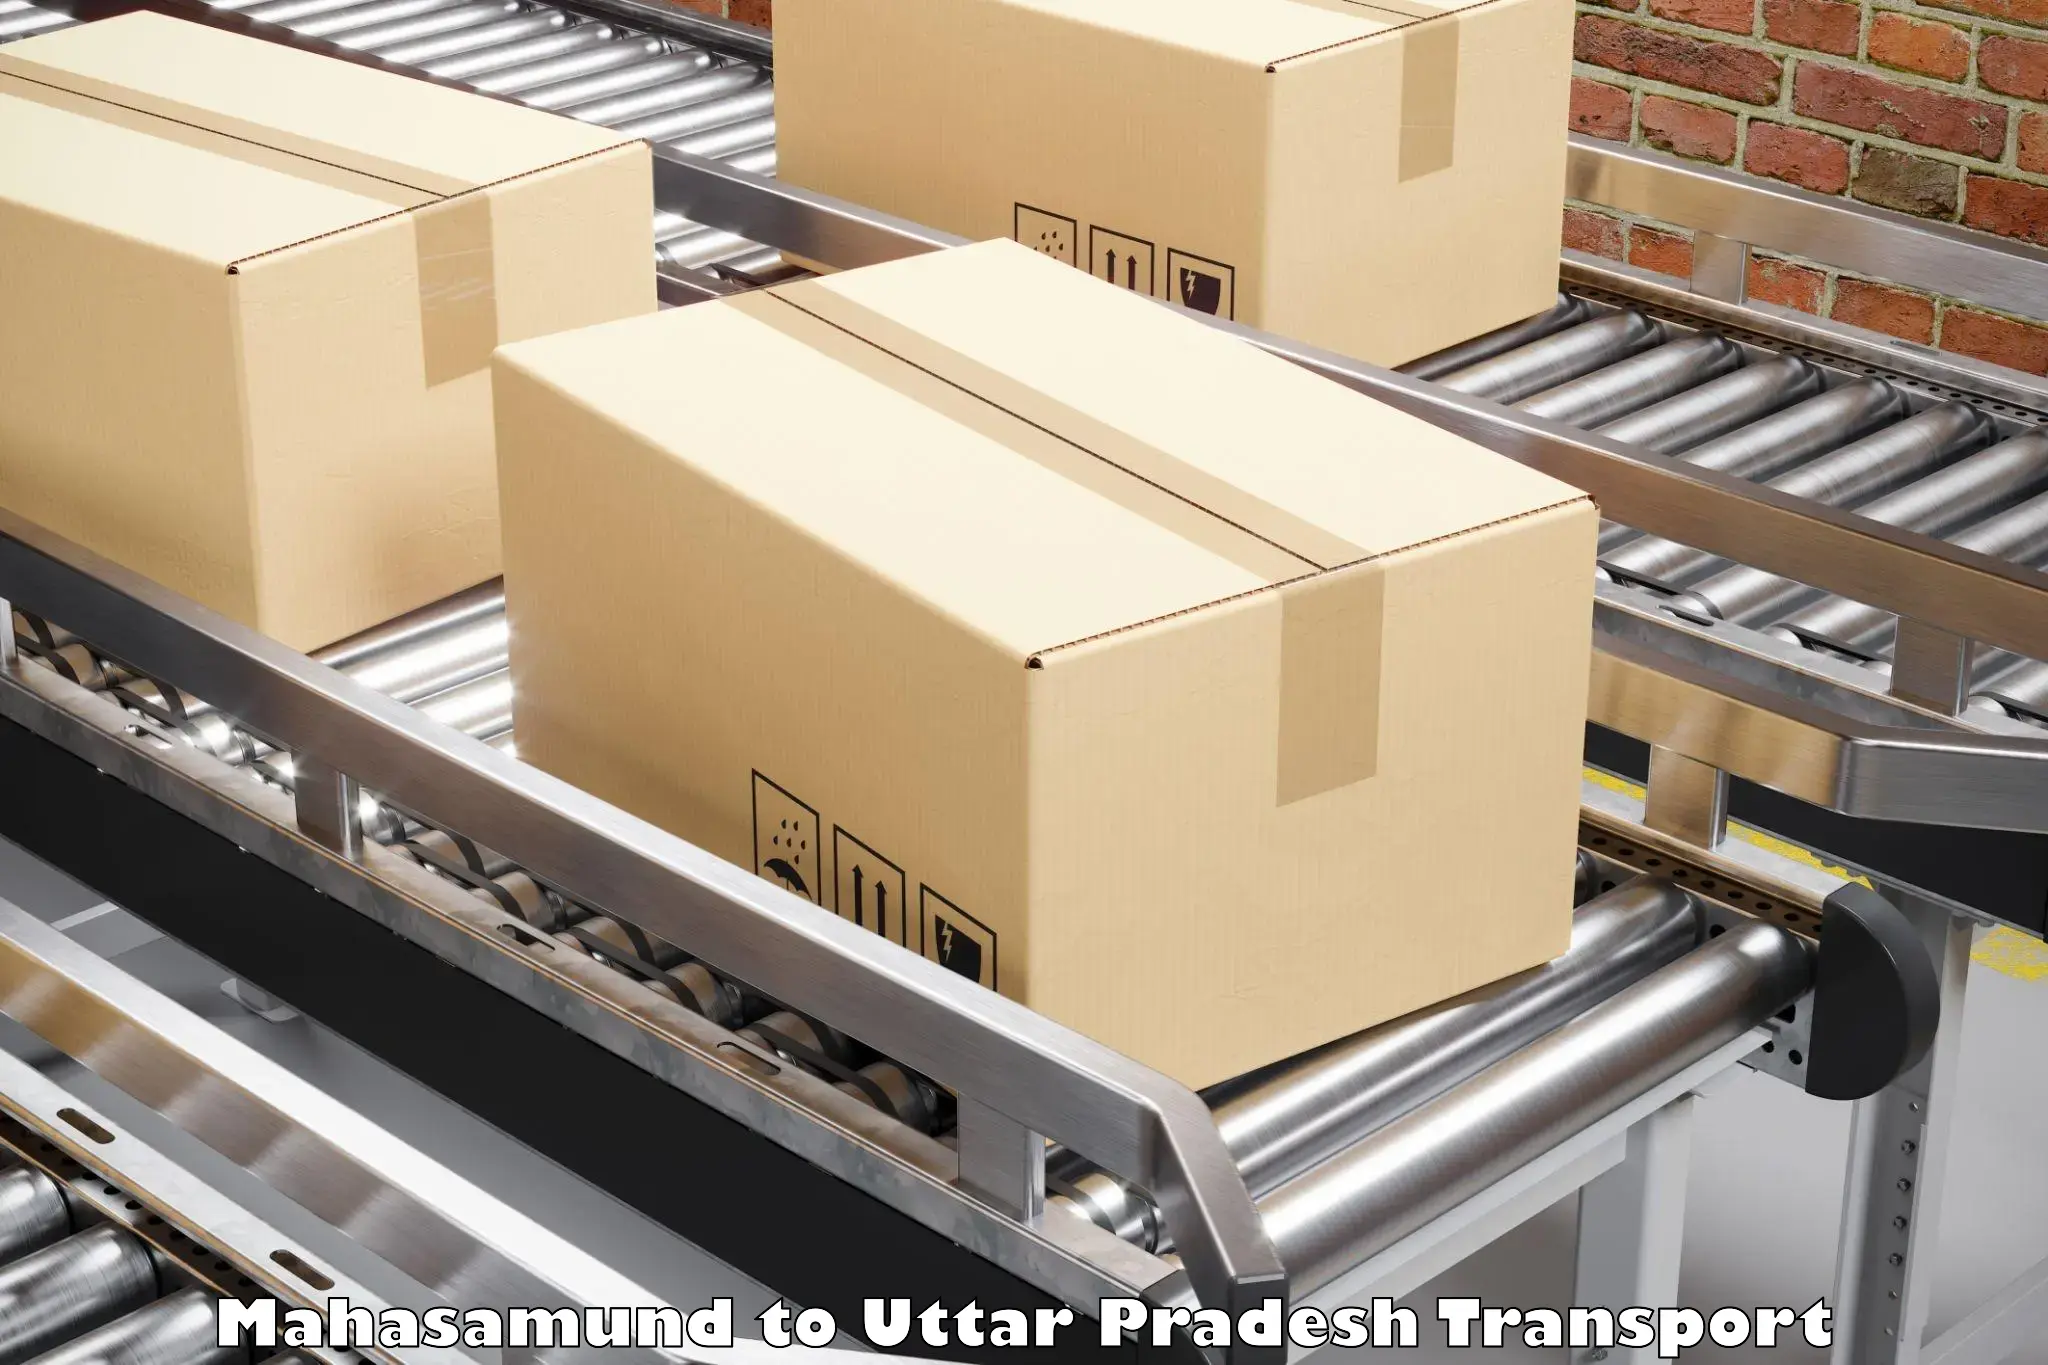 Express transport services in Mahasamund to Lucknow